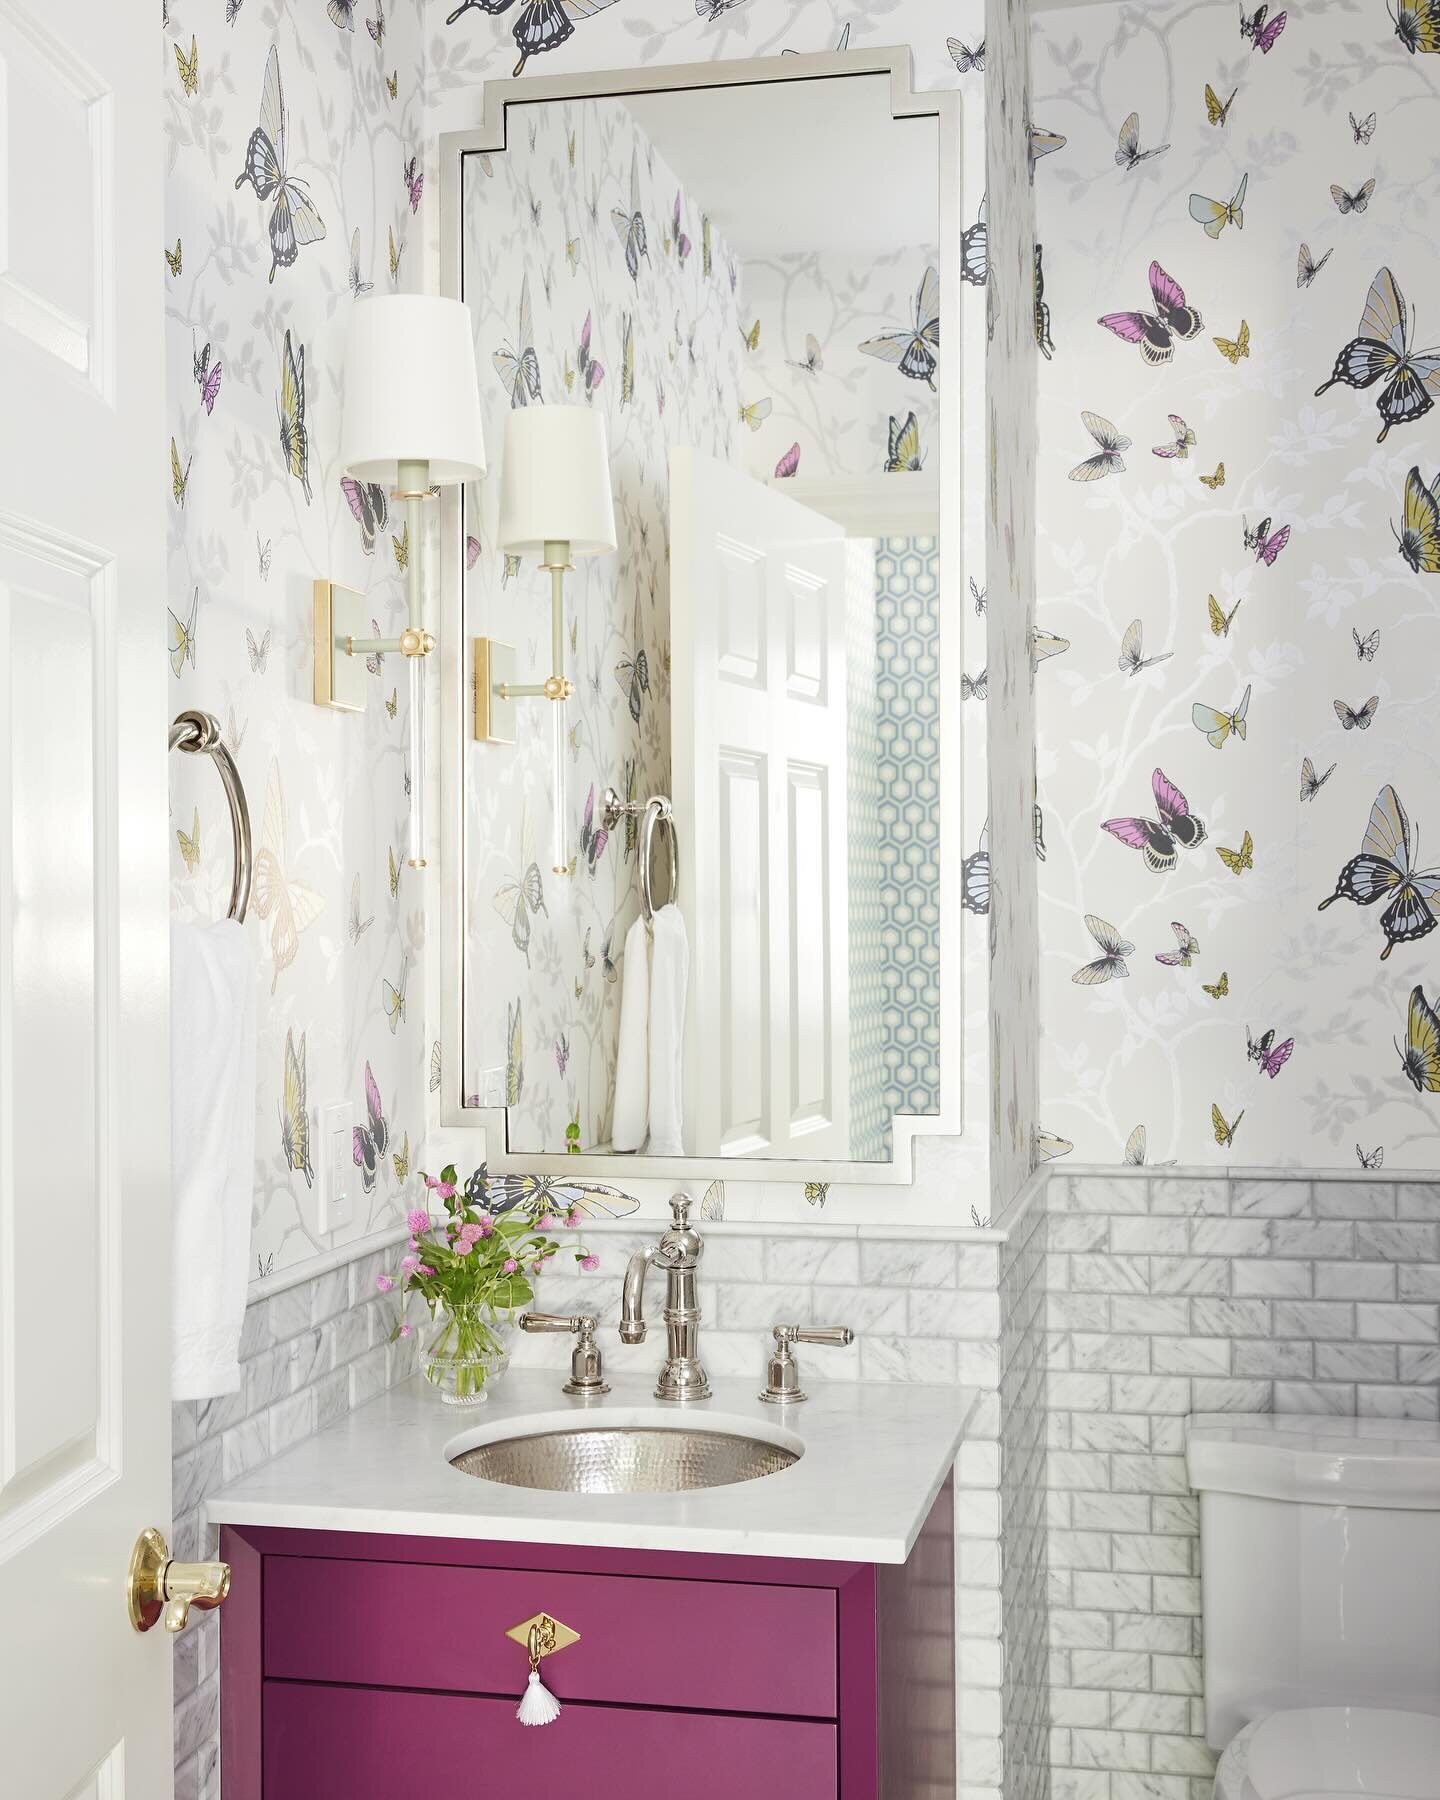 What&rsquo;s your favorite element of this sweet powder bath? We can&rsquo;t decide! The butterfly wallpaper or the cranberry colored vanity?!? Oh yeah, and the lighting, the mirror, or the hammered metal sink. There&rsquo;s too many gorgeous element